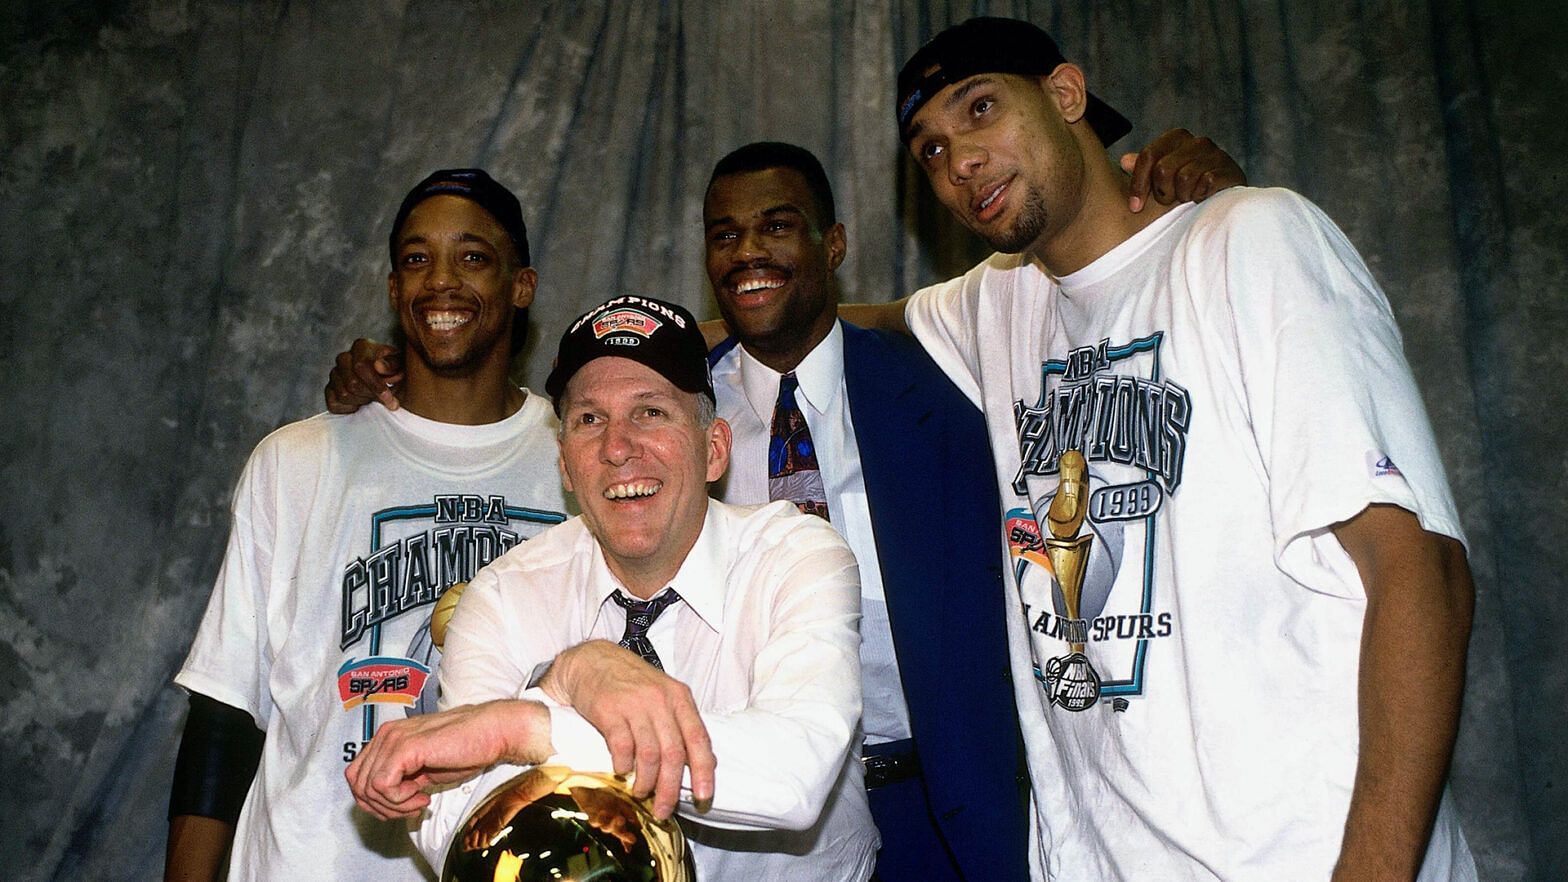 San Antonio Spurs became NBA champions in 1999. (Photo: Courtesy of NBA.com)